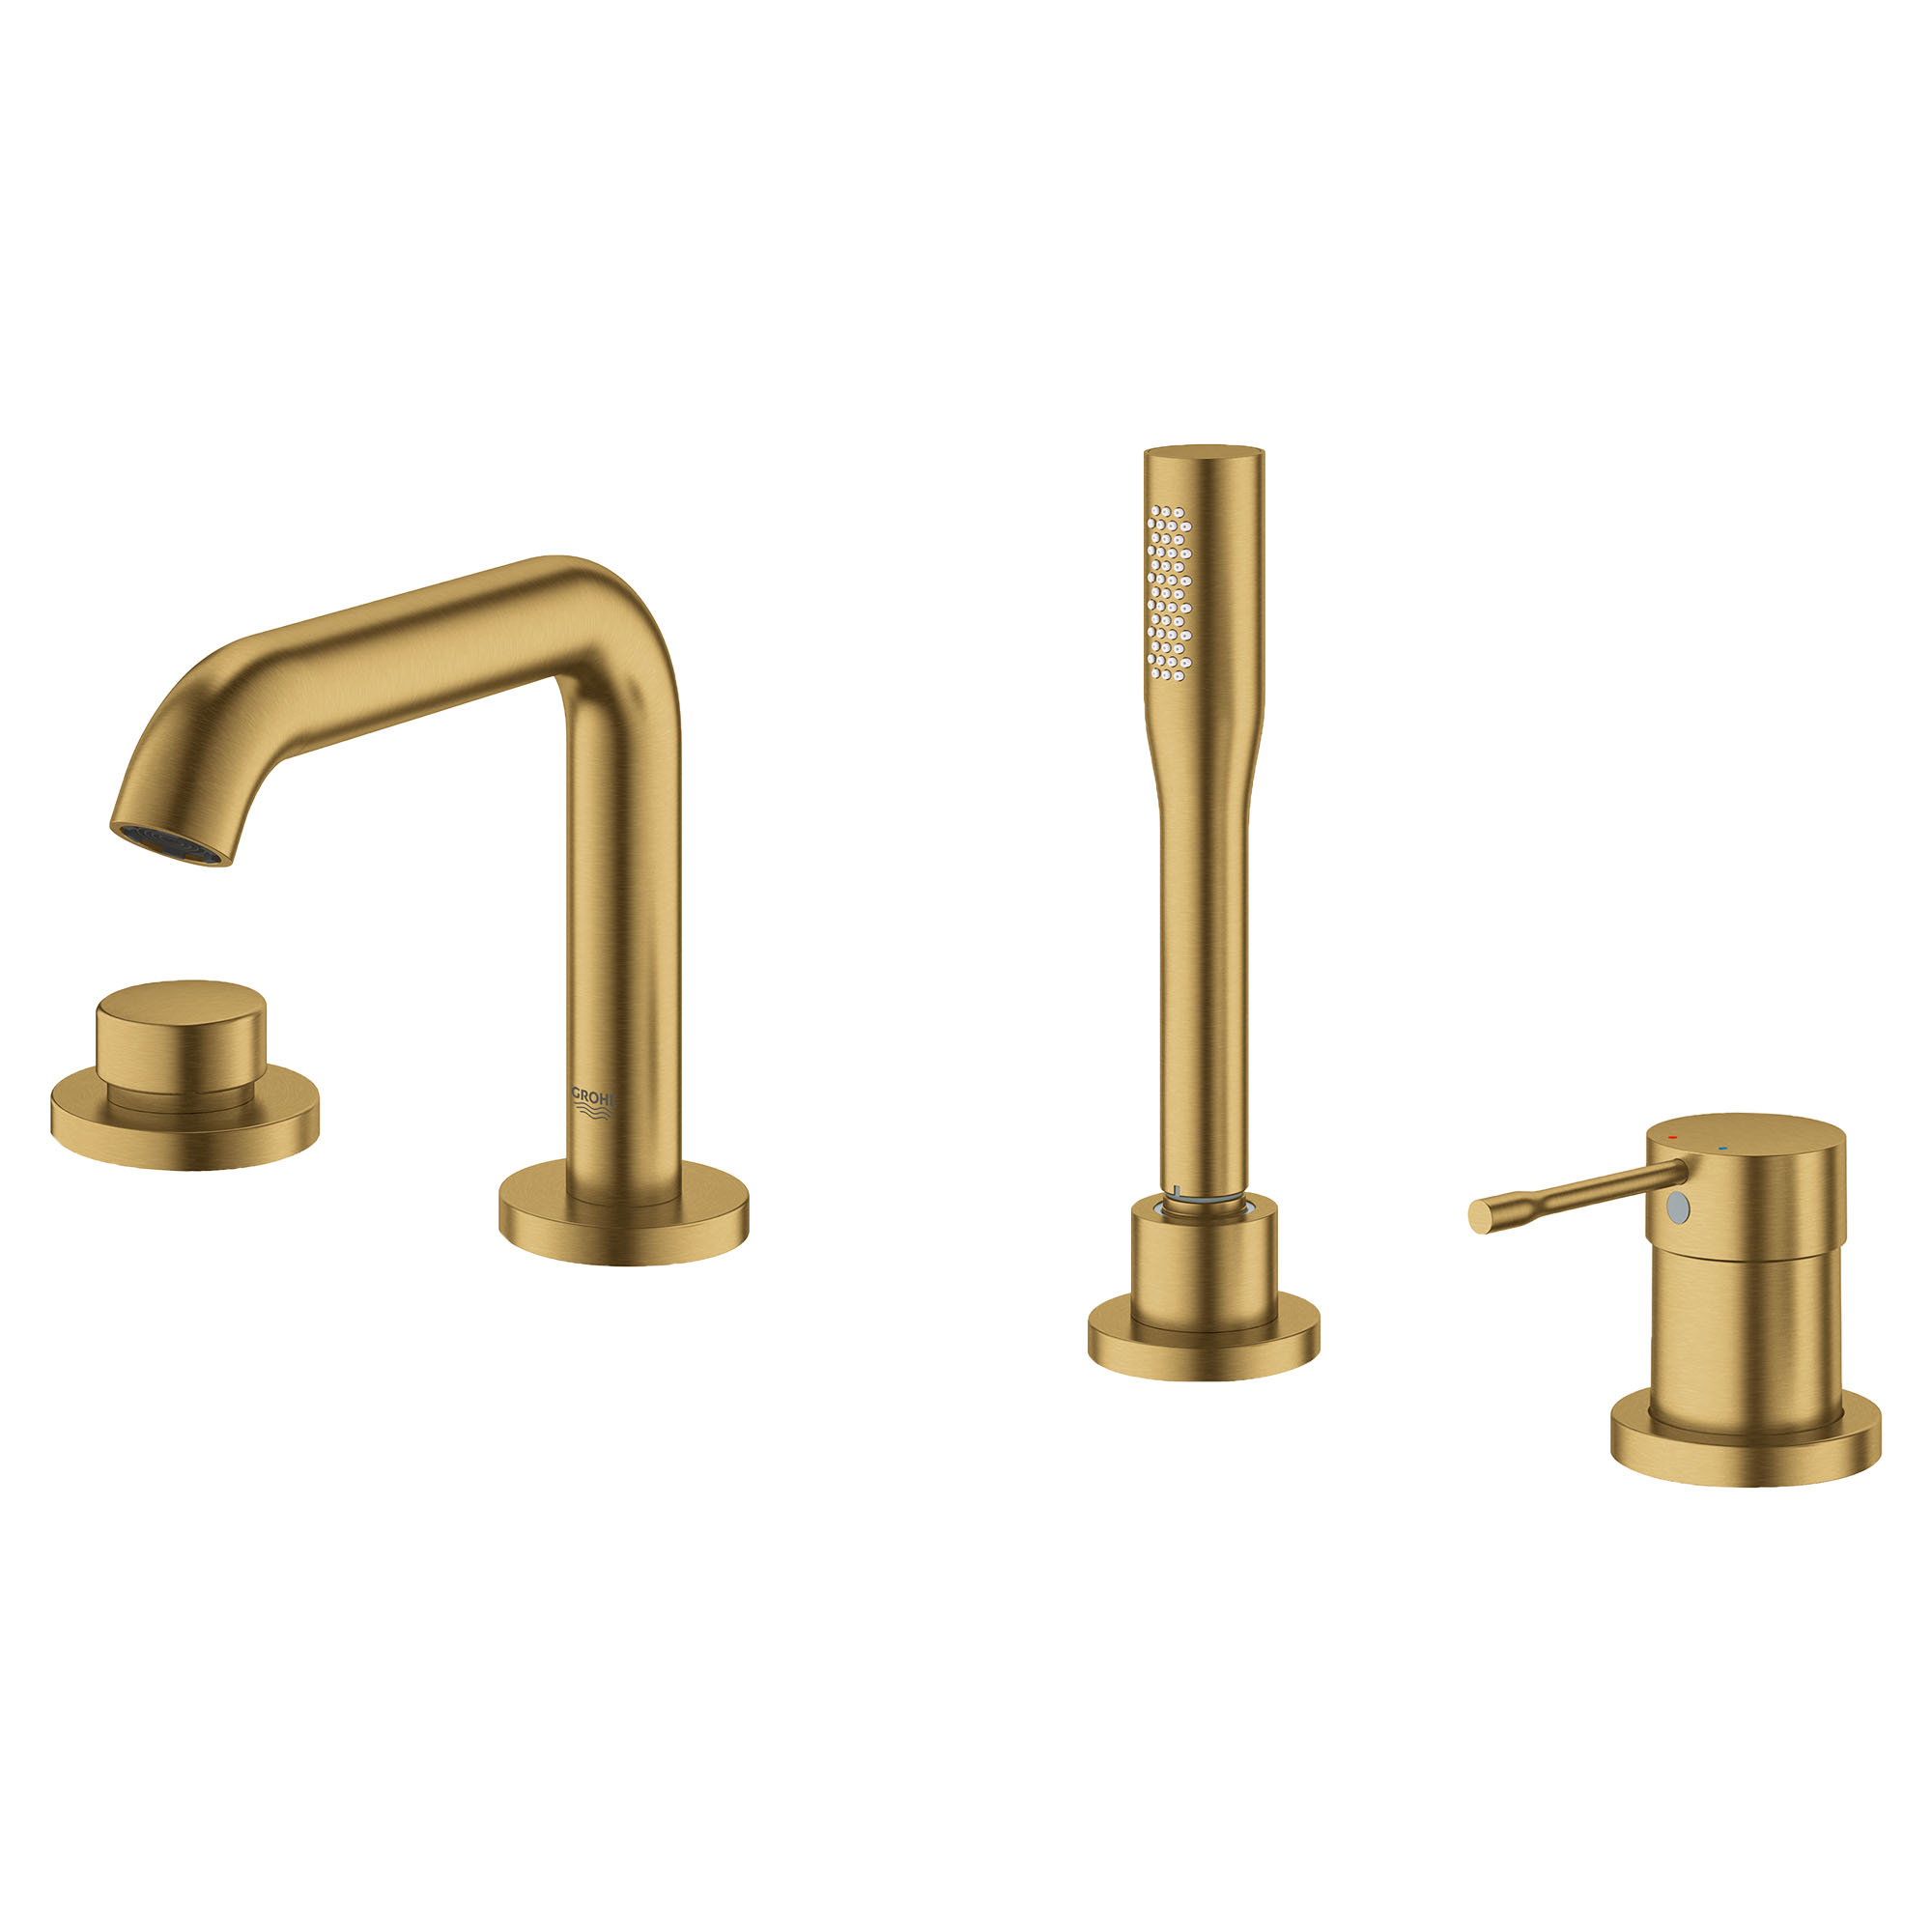 4-Hole Single-Handle Deck Mount Roman Tub Faucet with 1.75 GPM Hand Shower